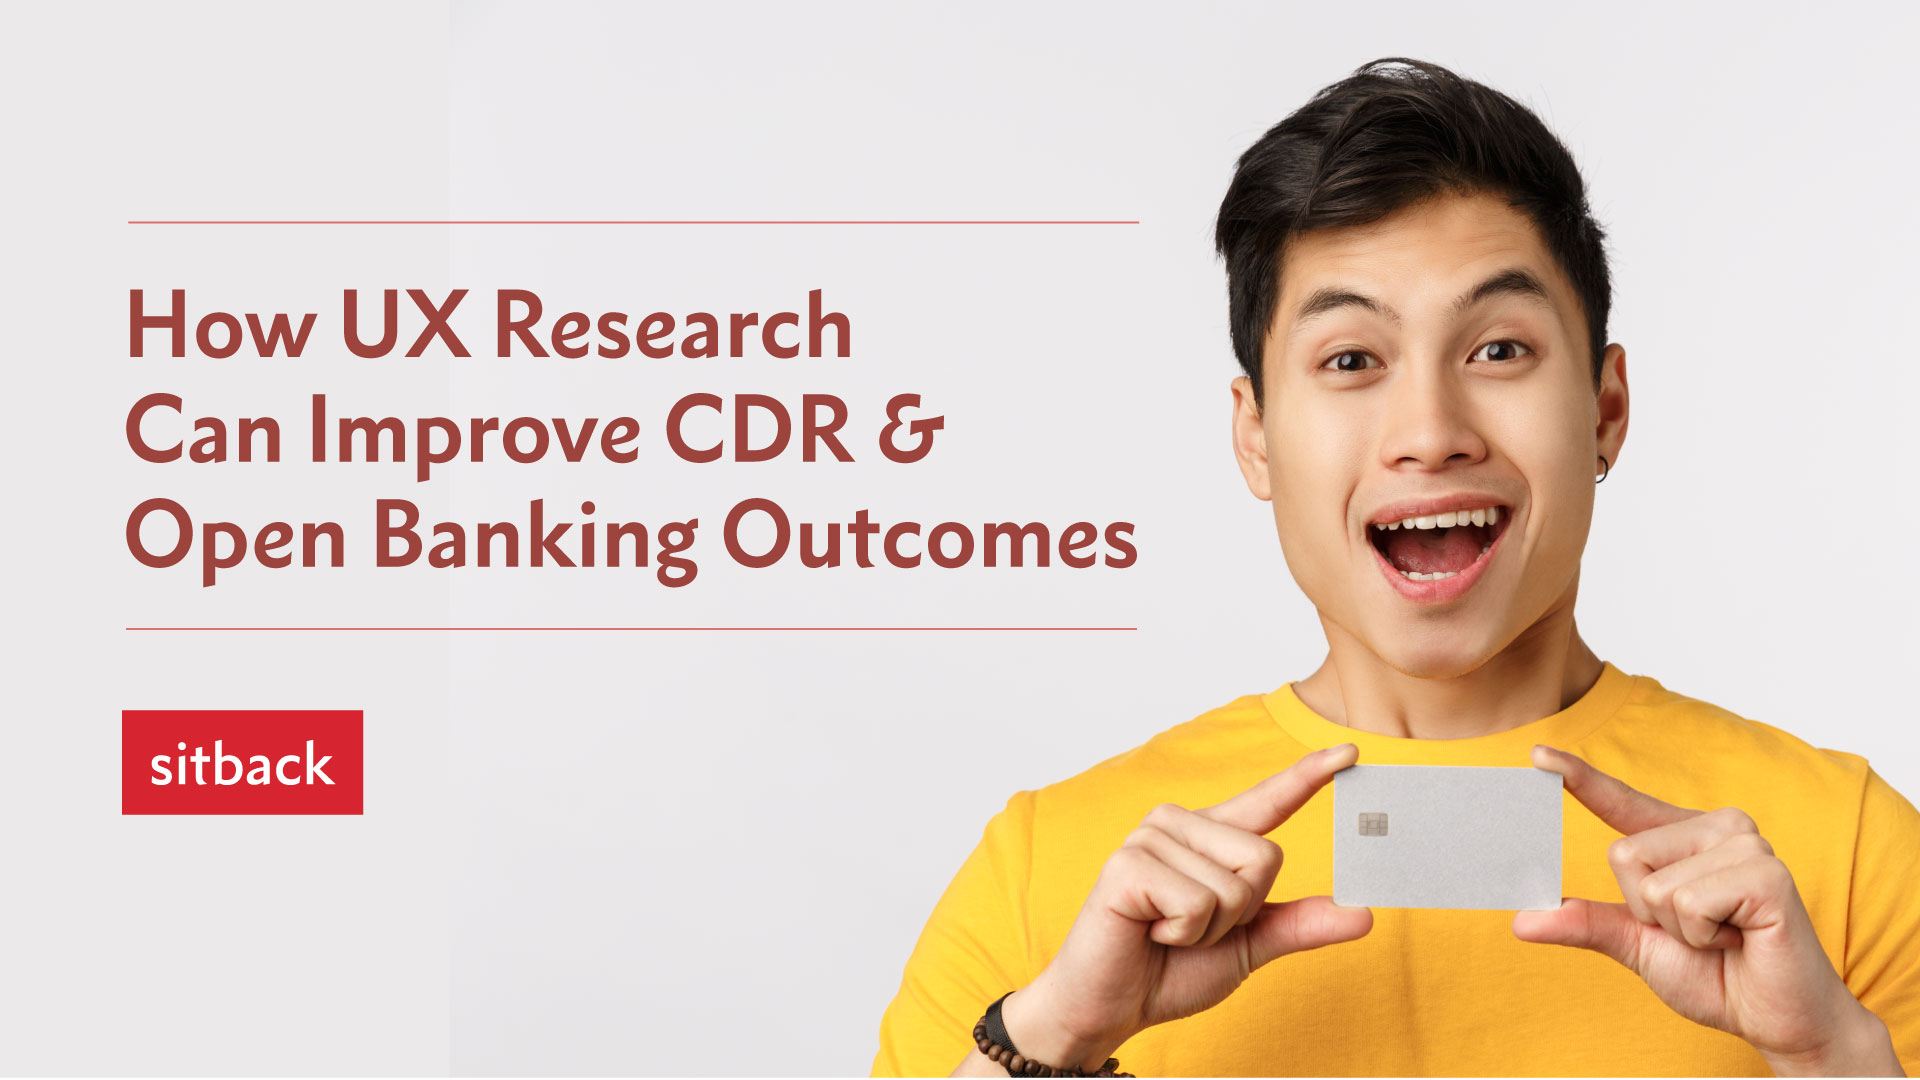 How User Experience Research Can Improve CDR & Open Banking Outcomes